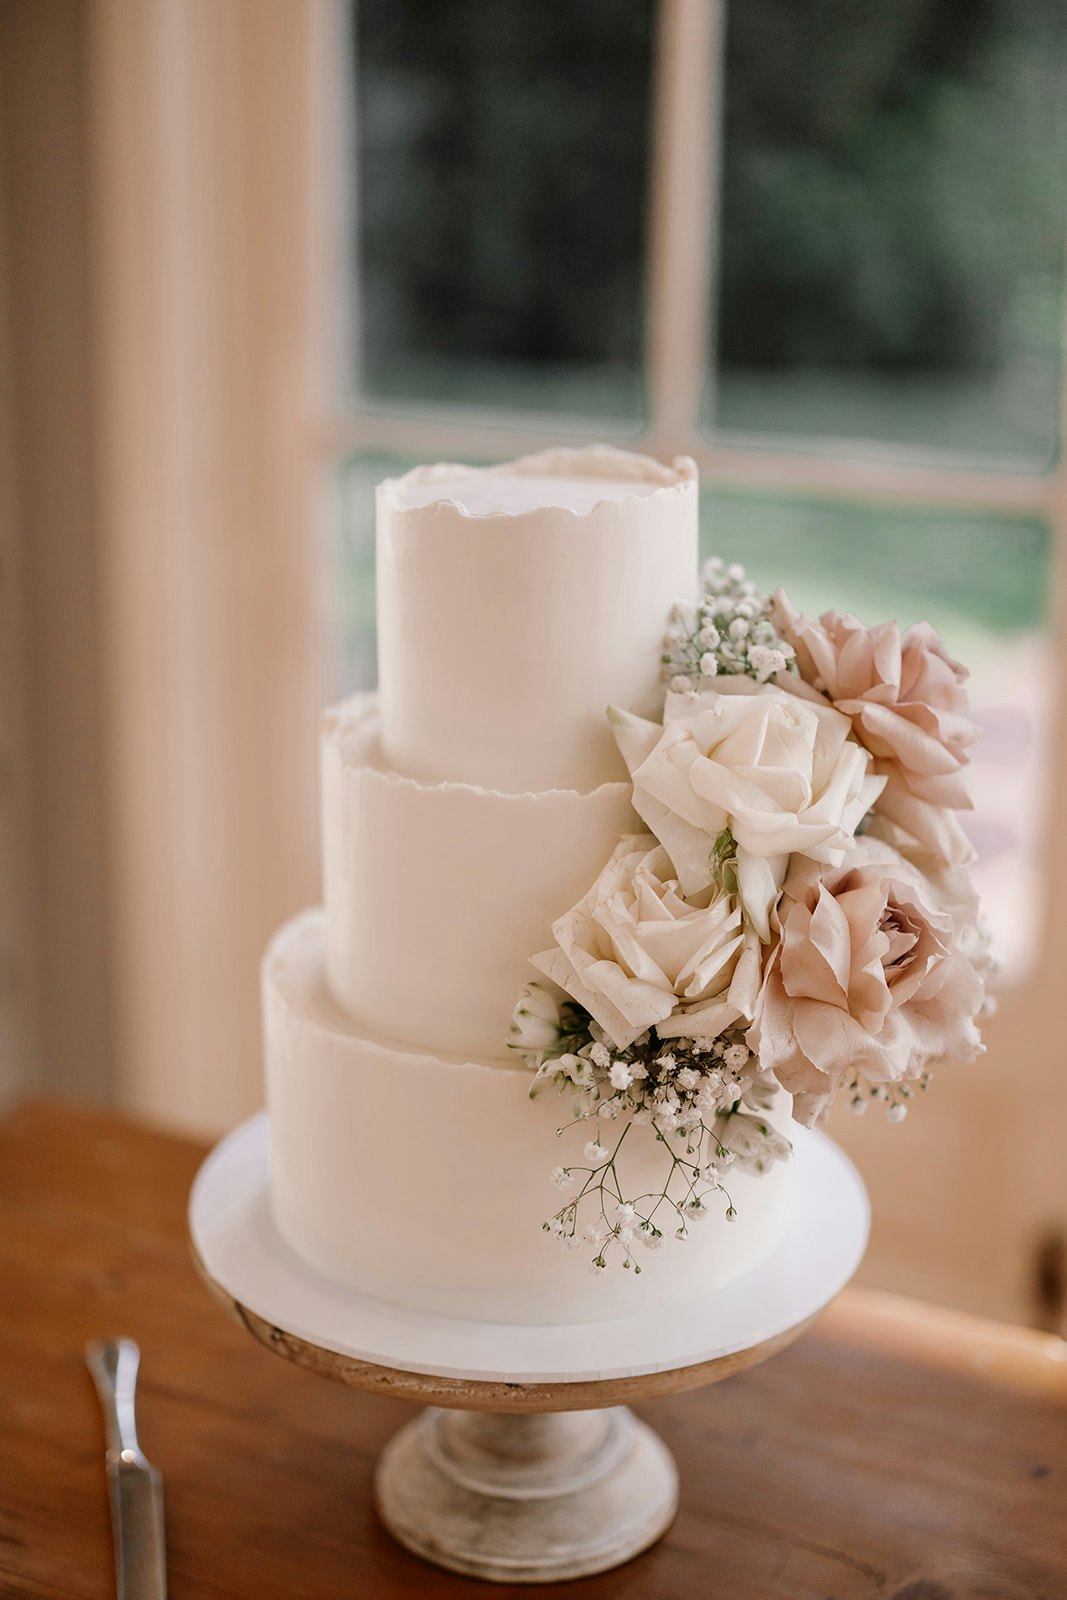 Wedding cake with flowers on the side